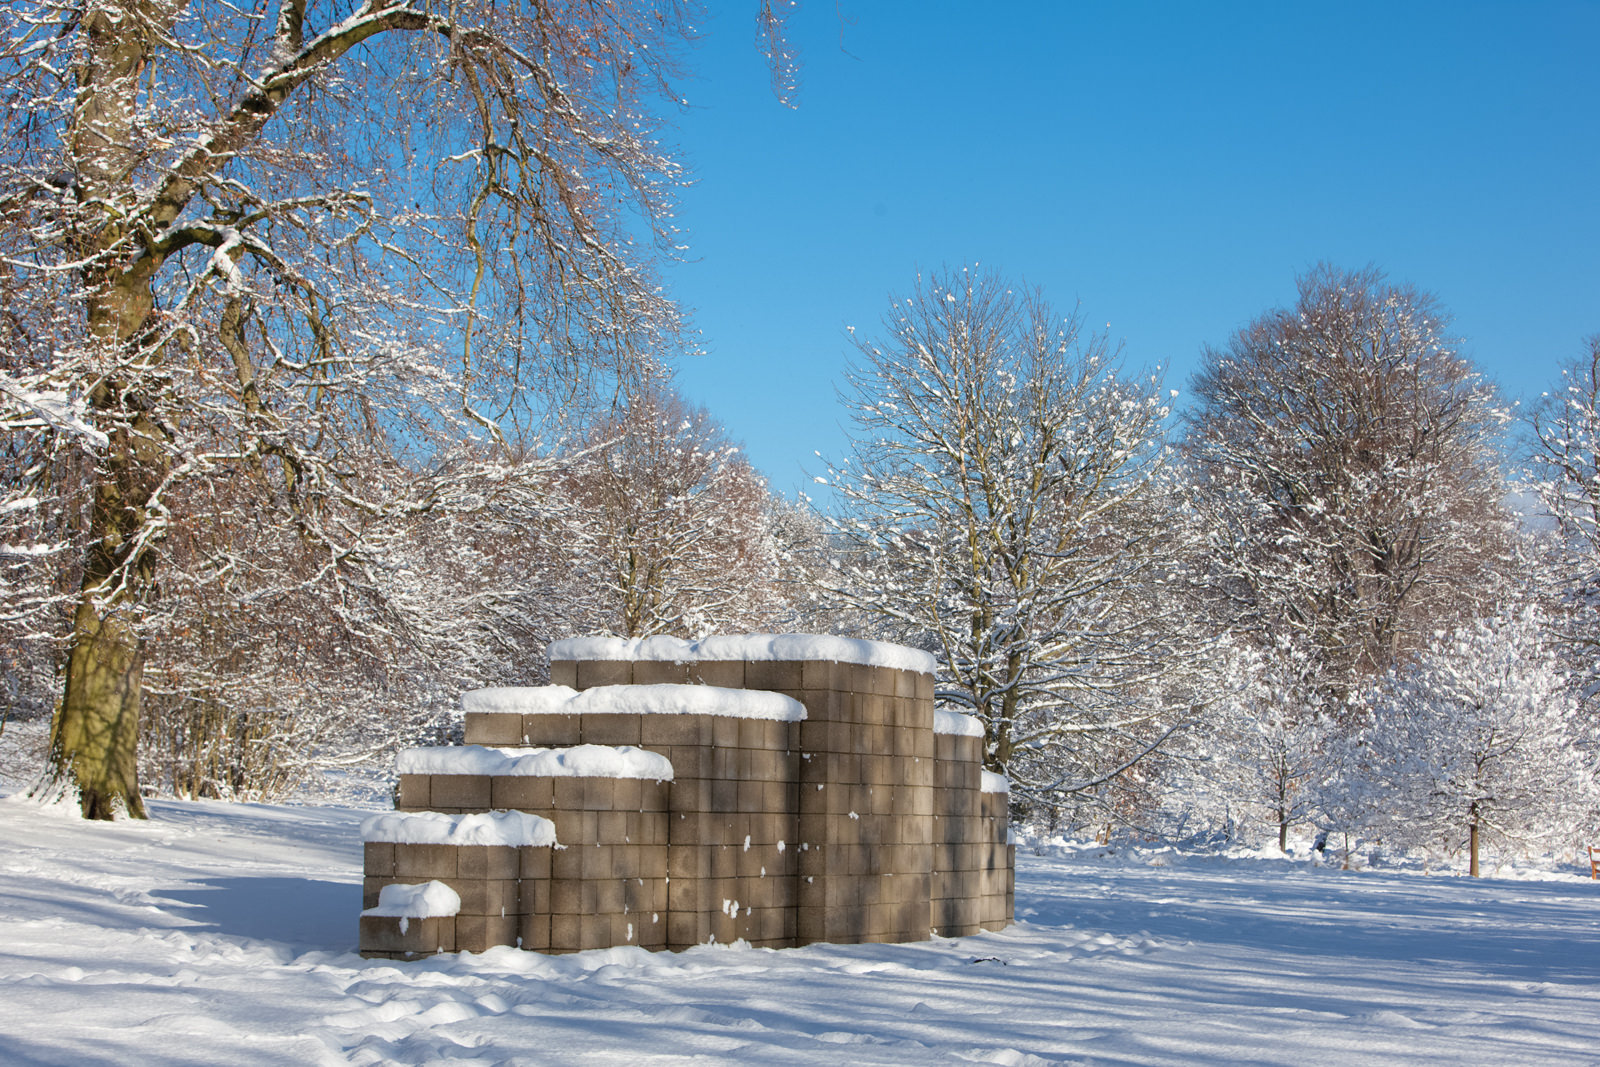 Sculpture in the parkland in a snowy day.